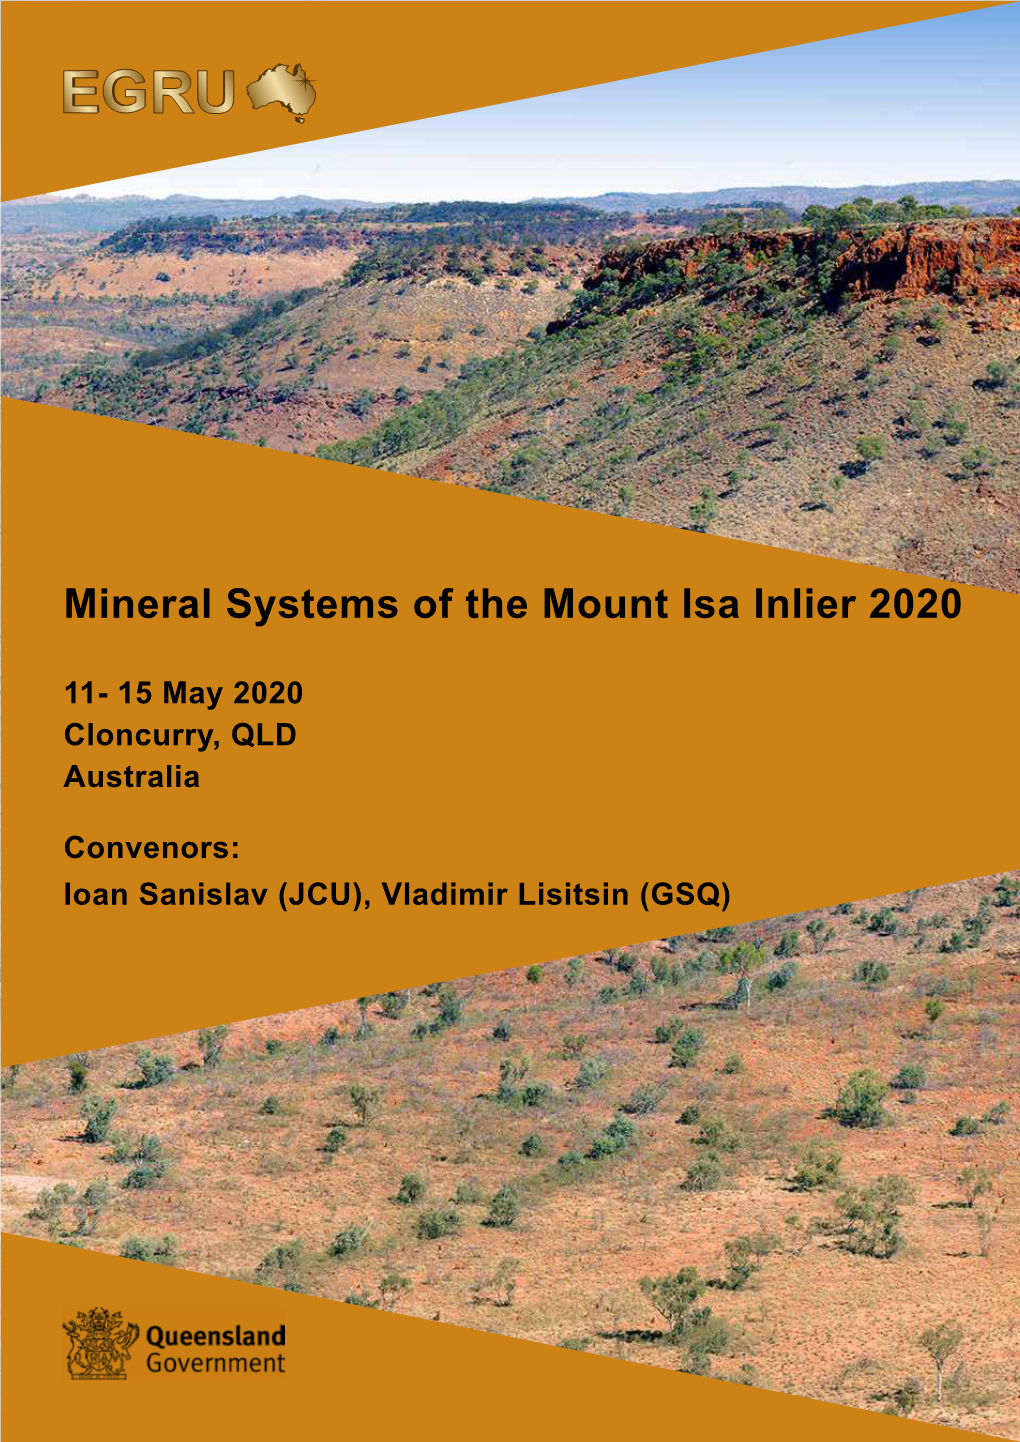 Mineral Systems of the Mount Isa Inlier 2020